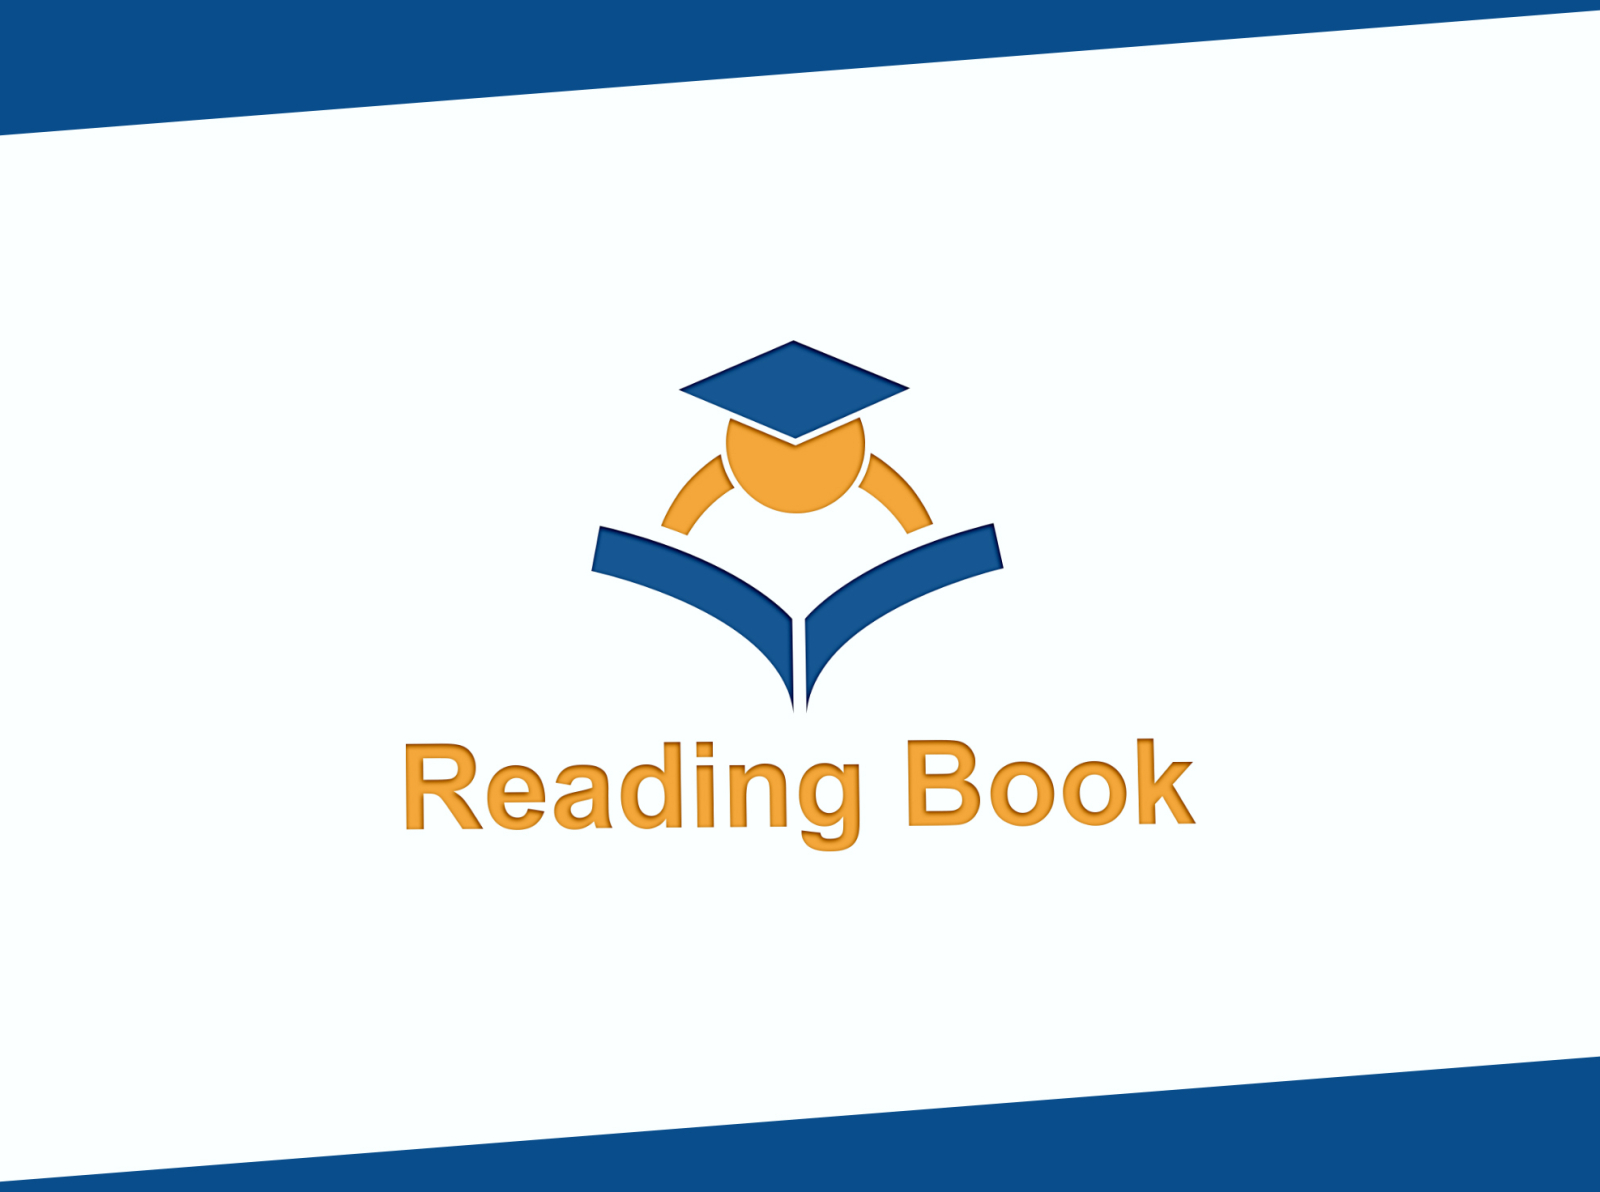 Reading Book Logo by Trusted IT Institute on Dribbble